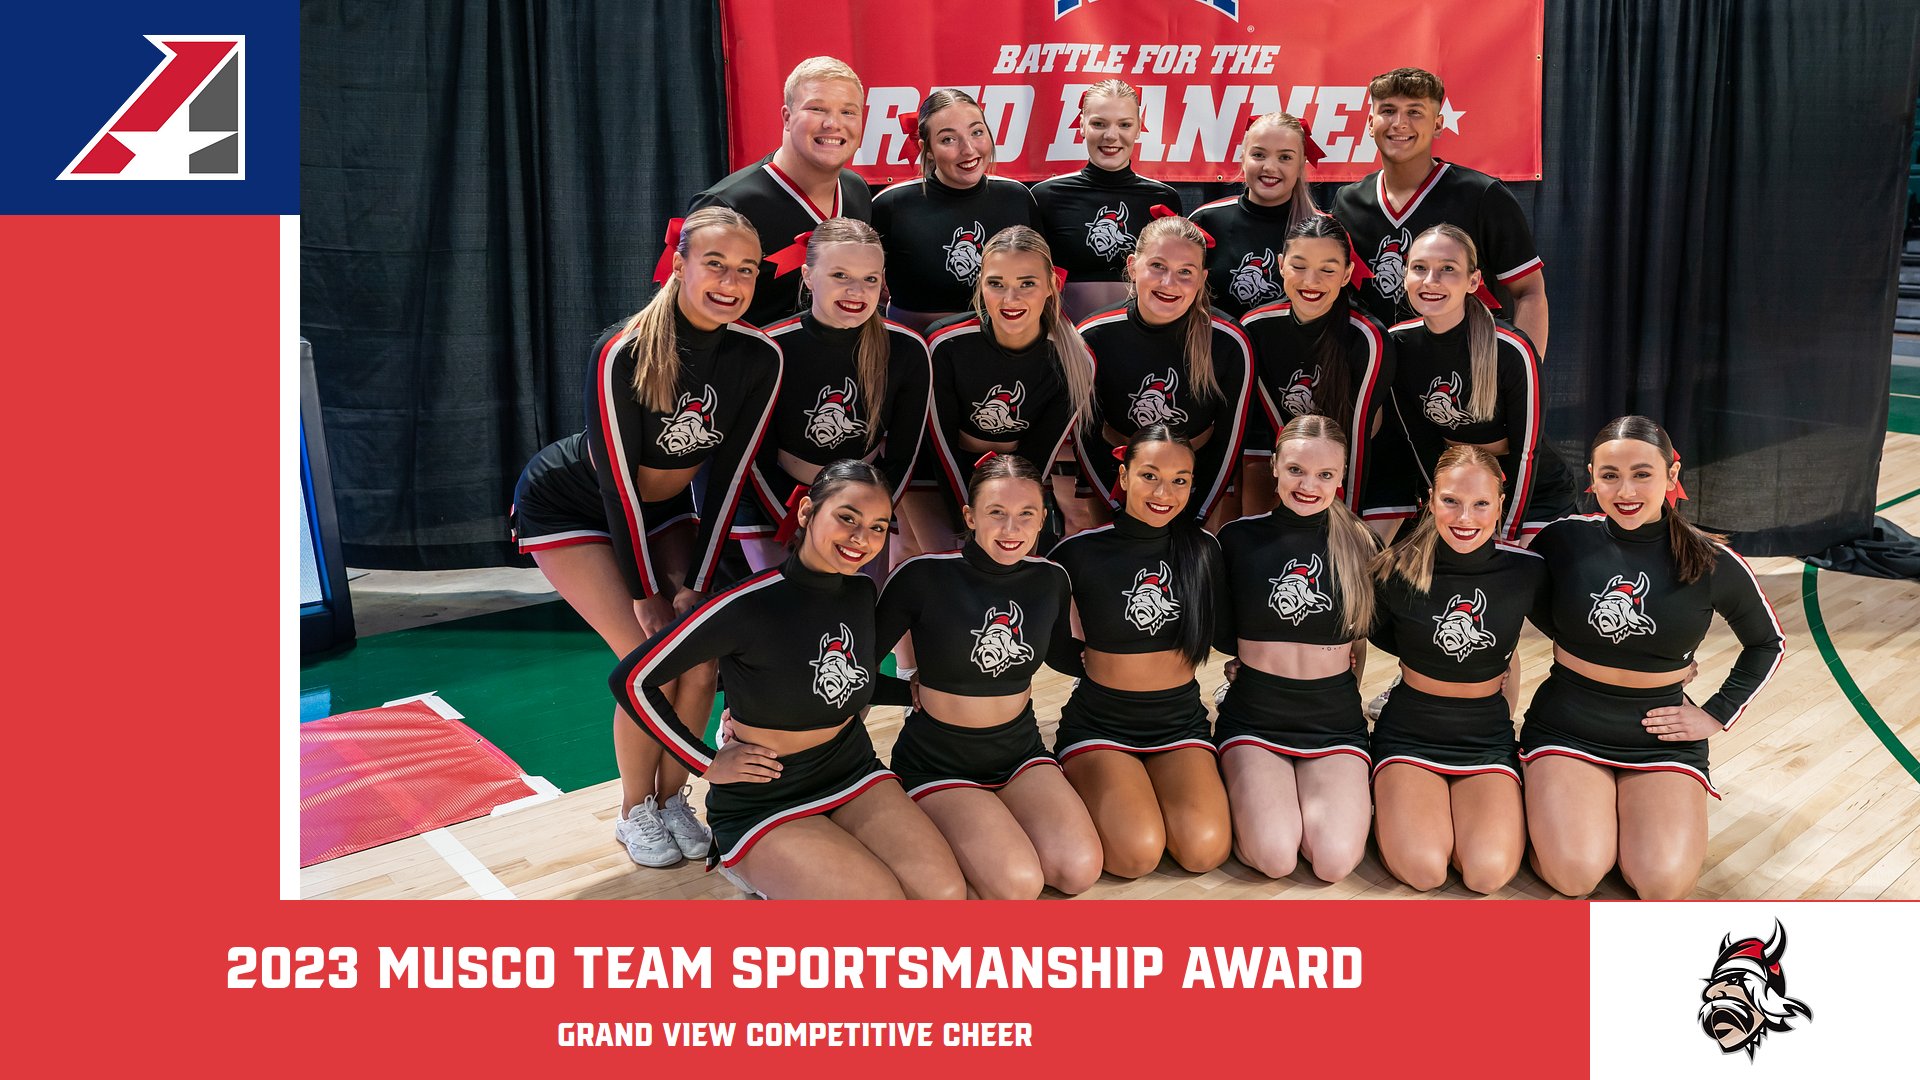 Grand View Competitive Cheer Selected 2023 Musco Team Sportsmanship Award Winners